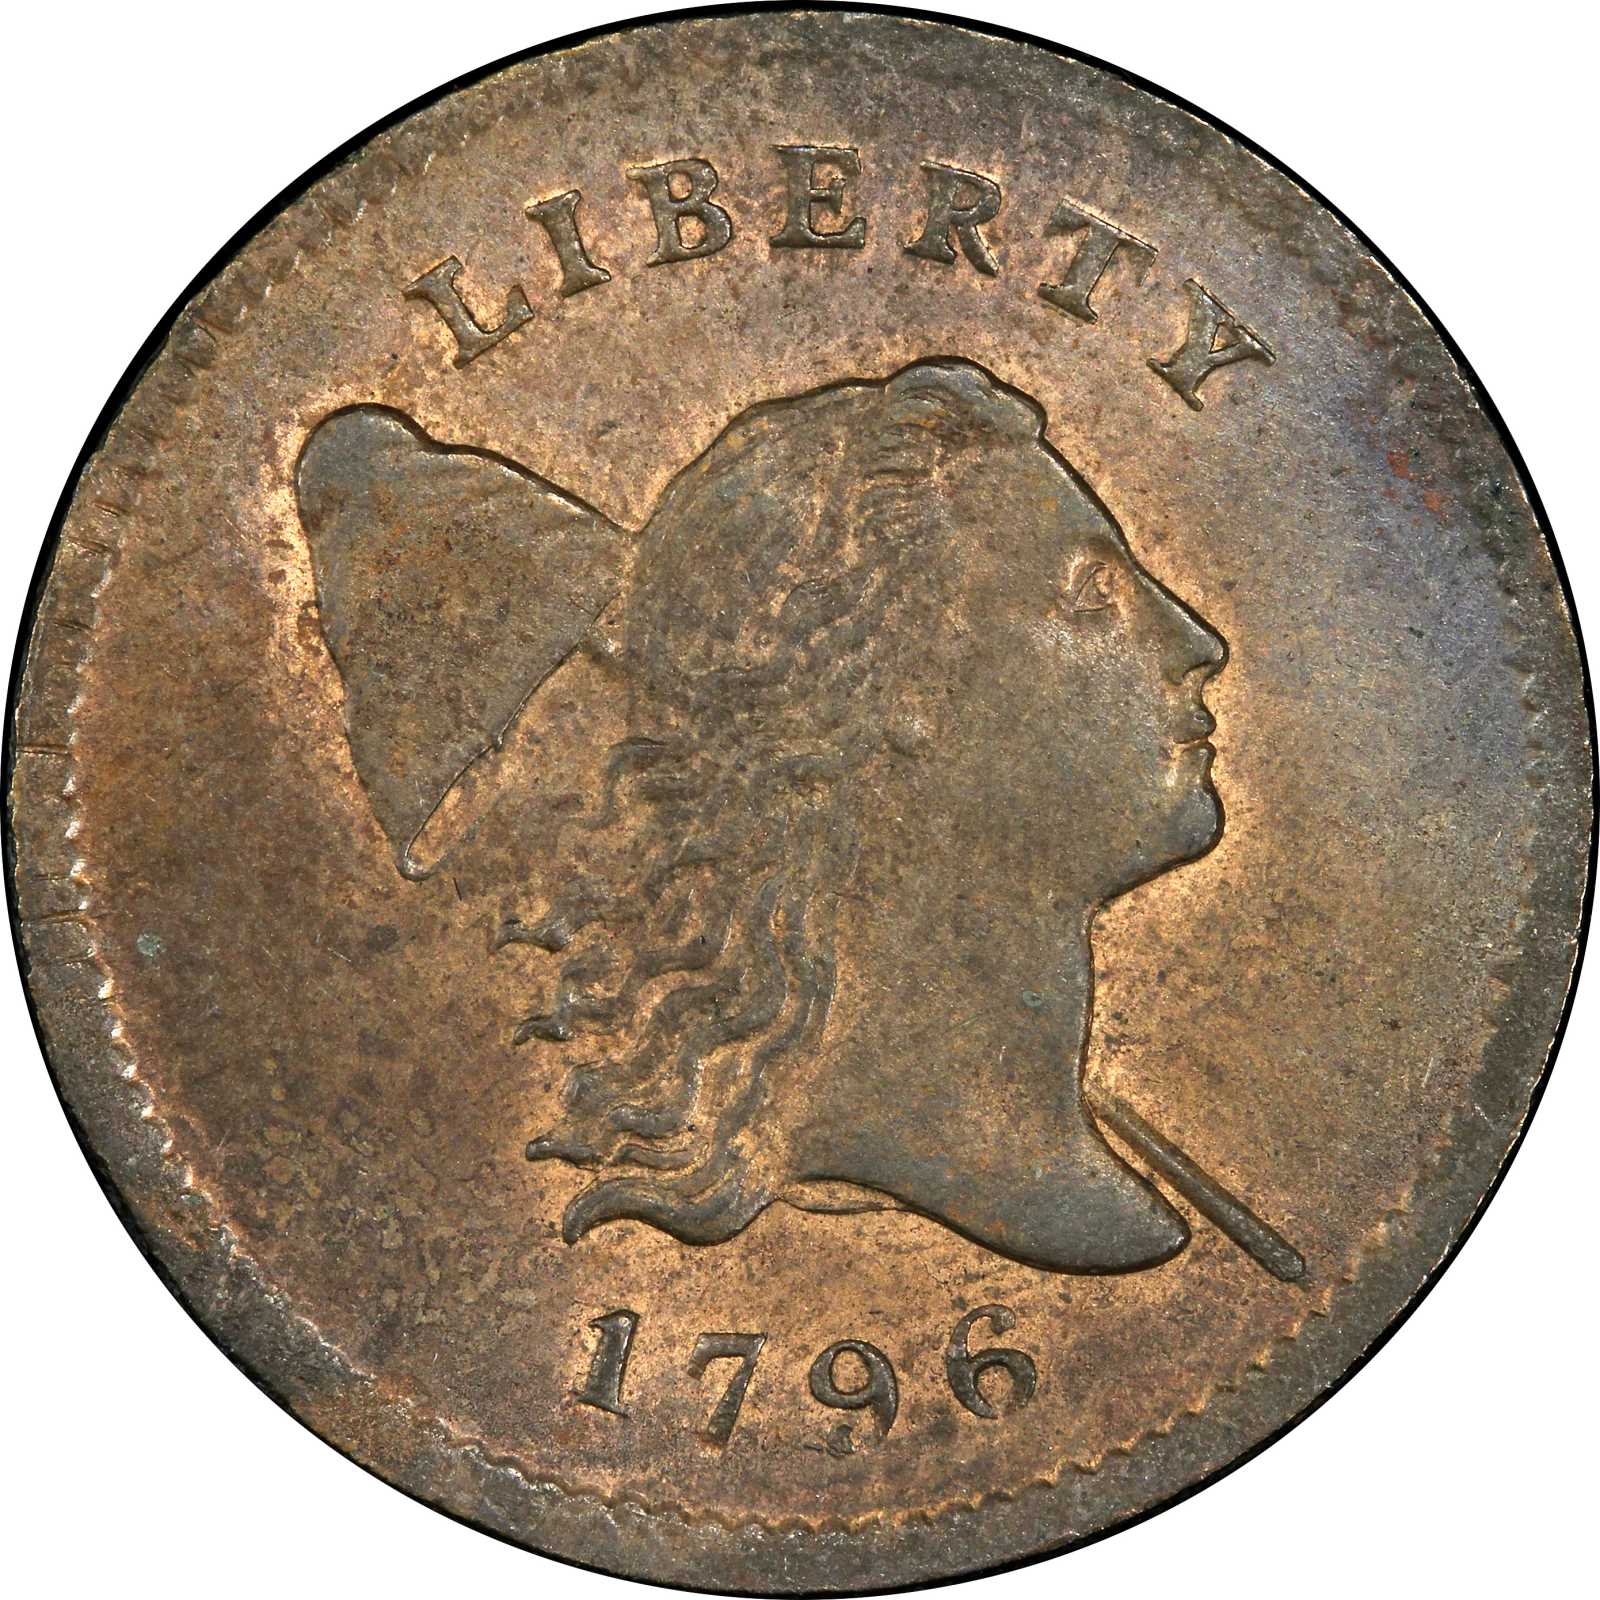 Download 1796 Liberty Cap Half Cent. Cohen-2. Rarity-4+. With Pole. MS-66 RB (PCGS). | Stacks Bowers